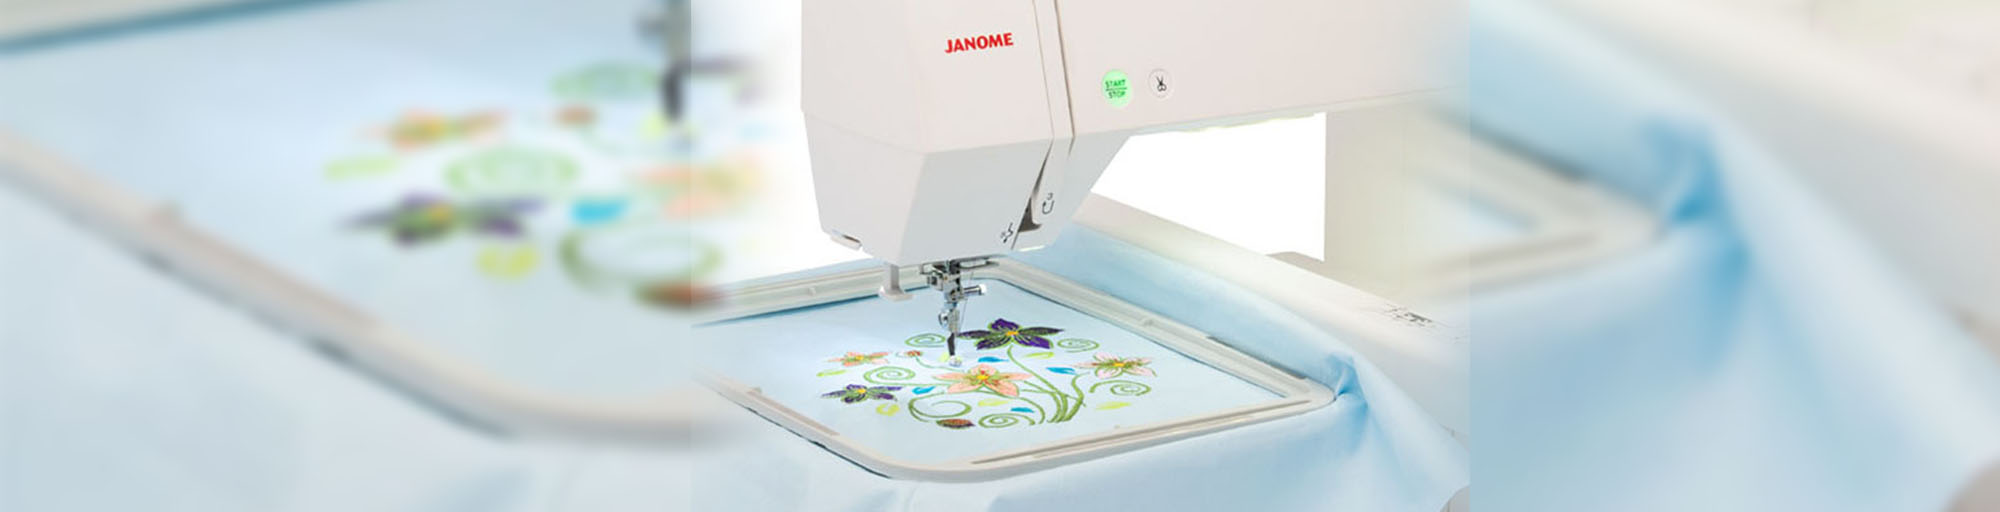 Janome embroidery formats banner